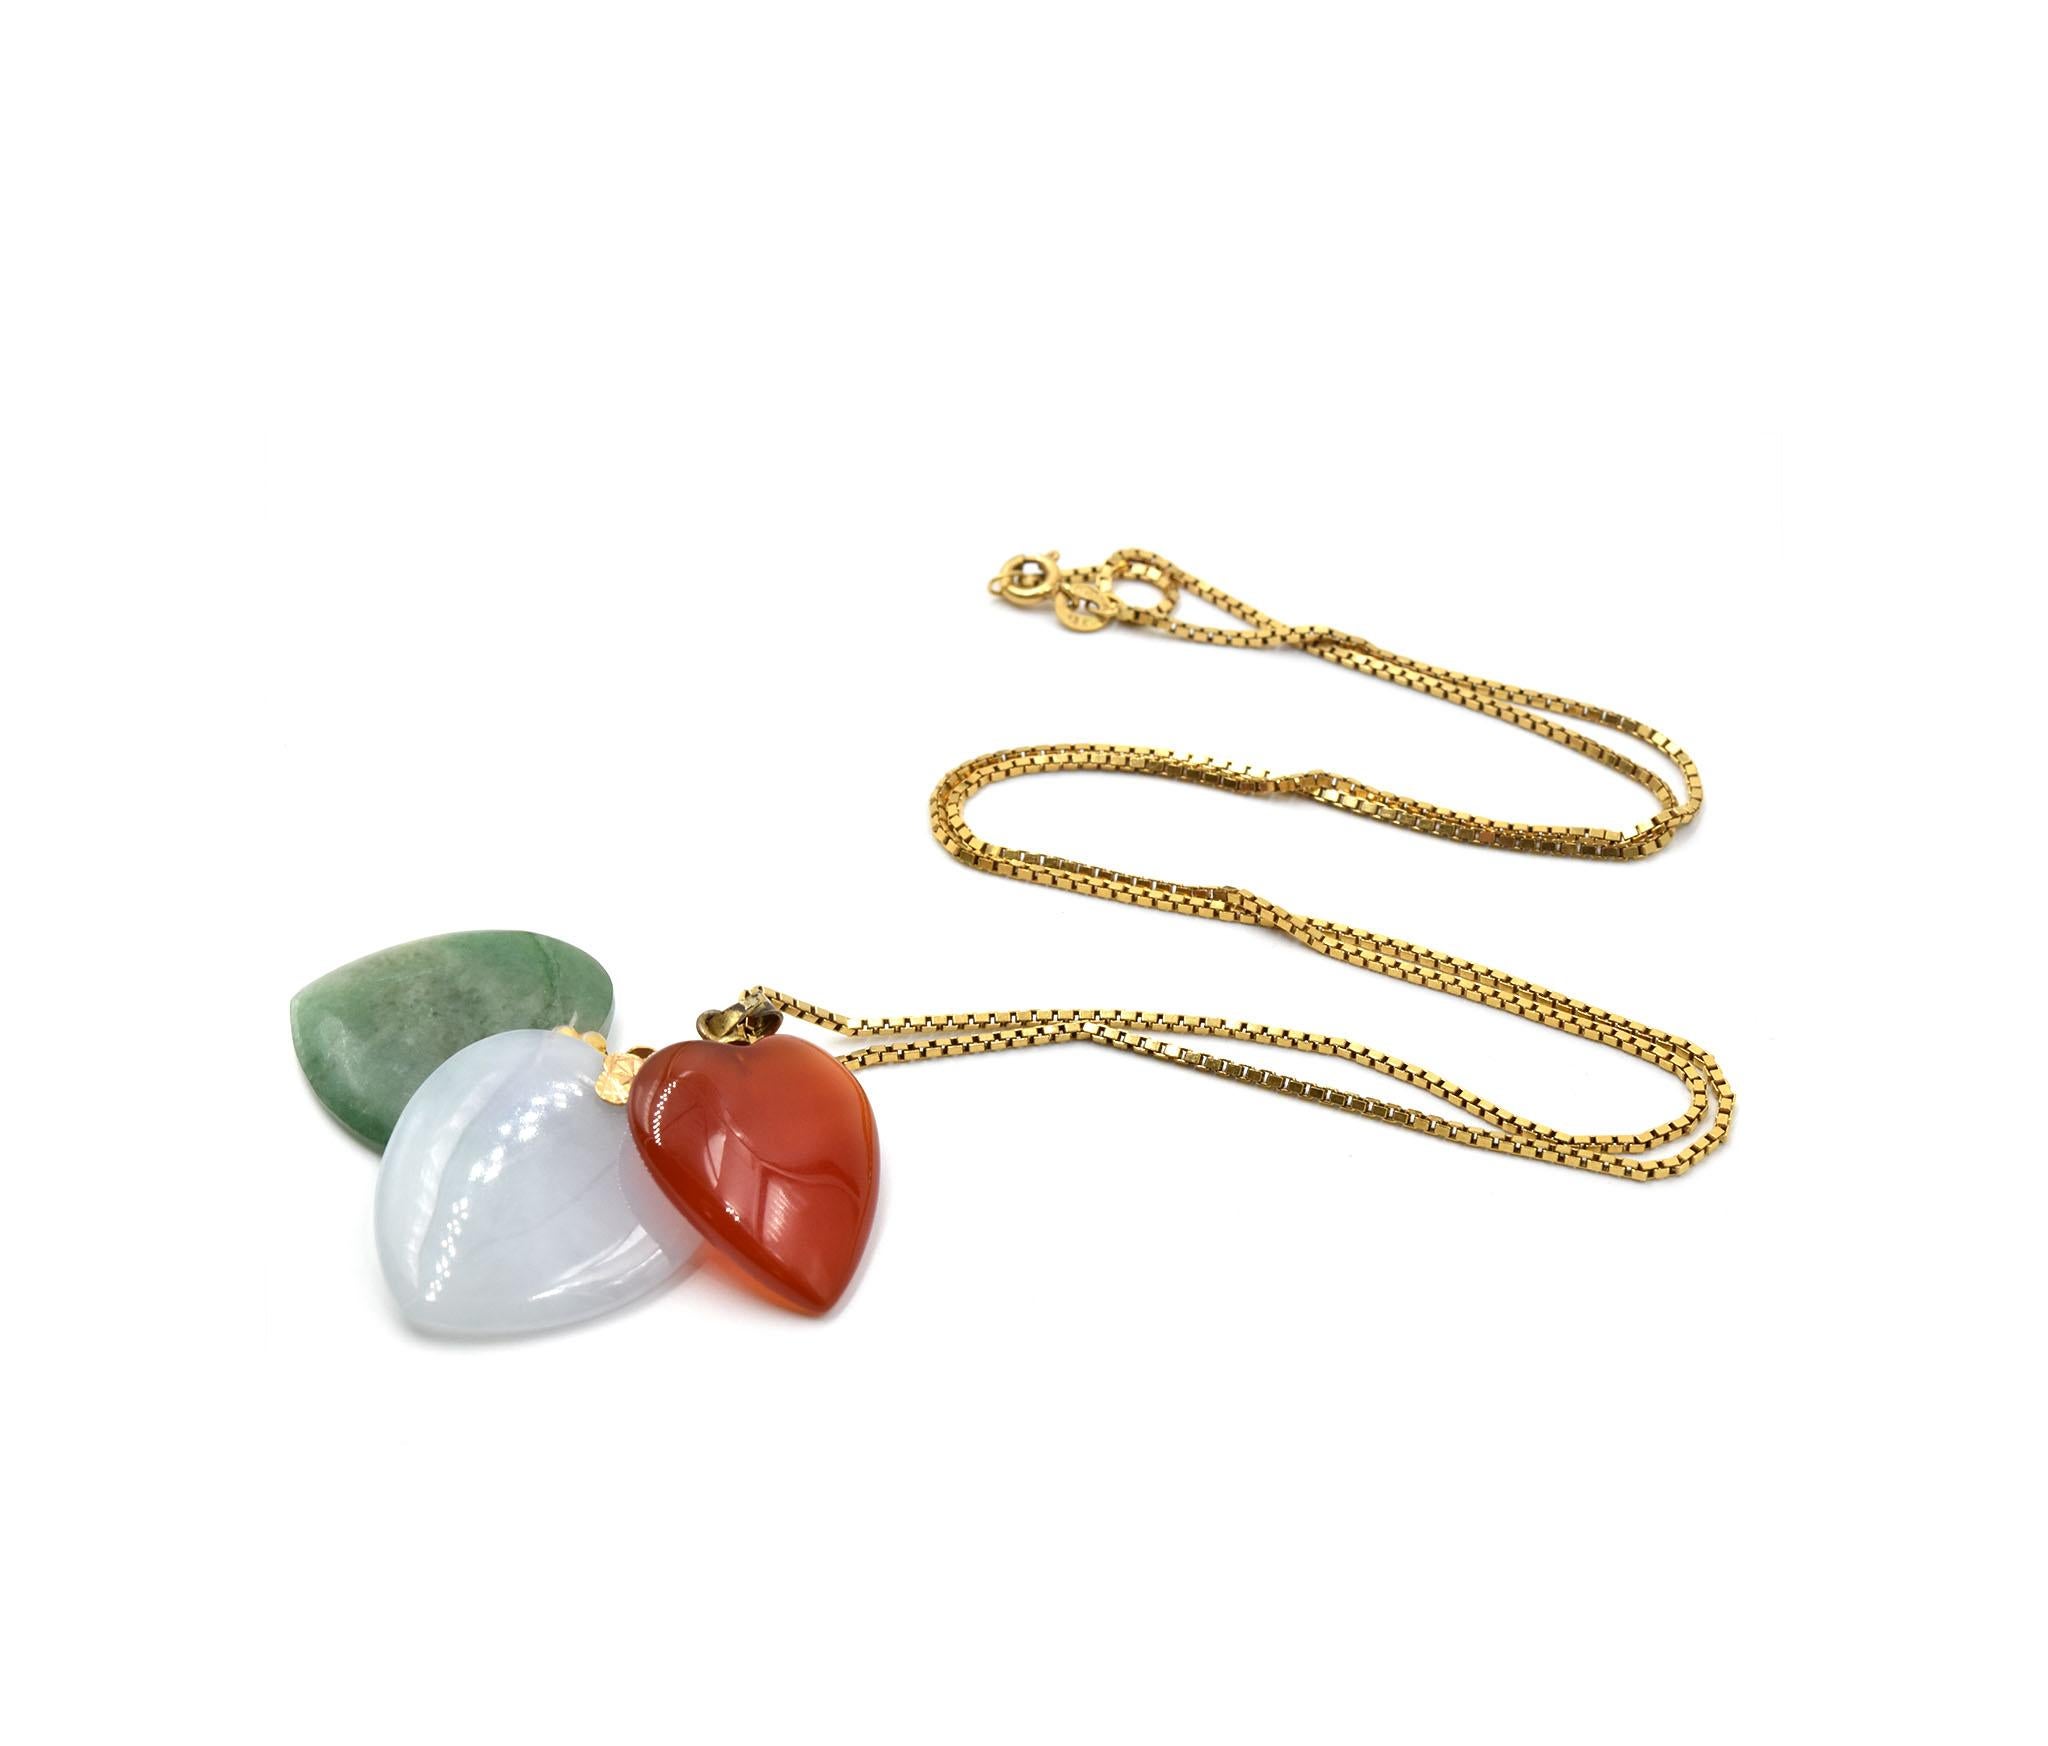 Designer: custom design
Material: 18k yellow gold
Jade: three smooth heart shape pieces of jade in red, green & white
Dimensions: necklace is 26-inch long
Weight: 20.25 grams
